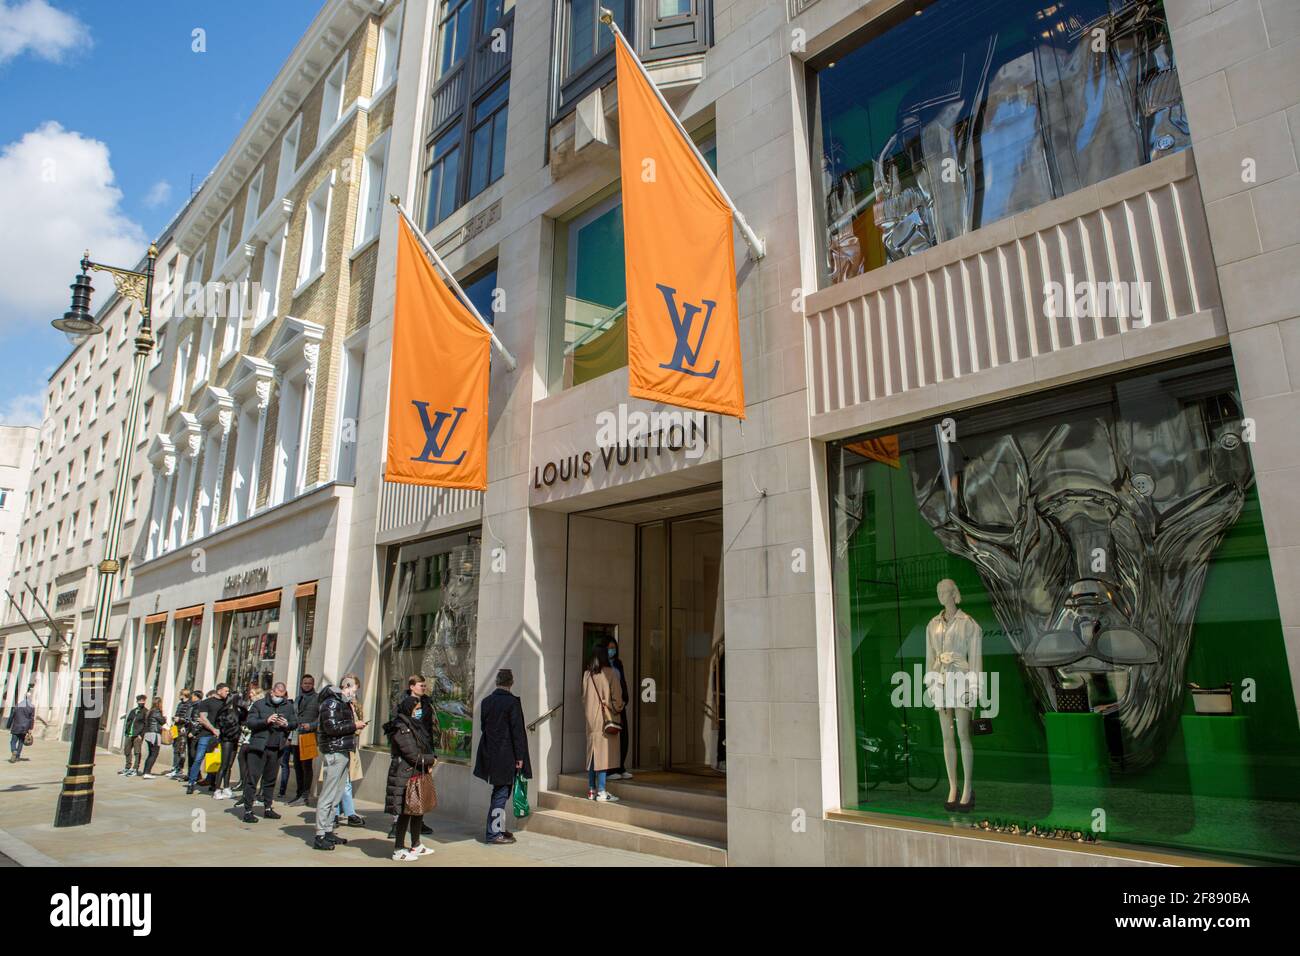 Louis Vuitton Moves Into London Mall – WWD